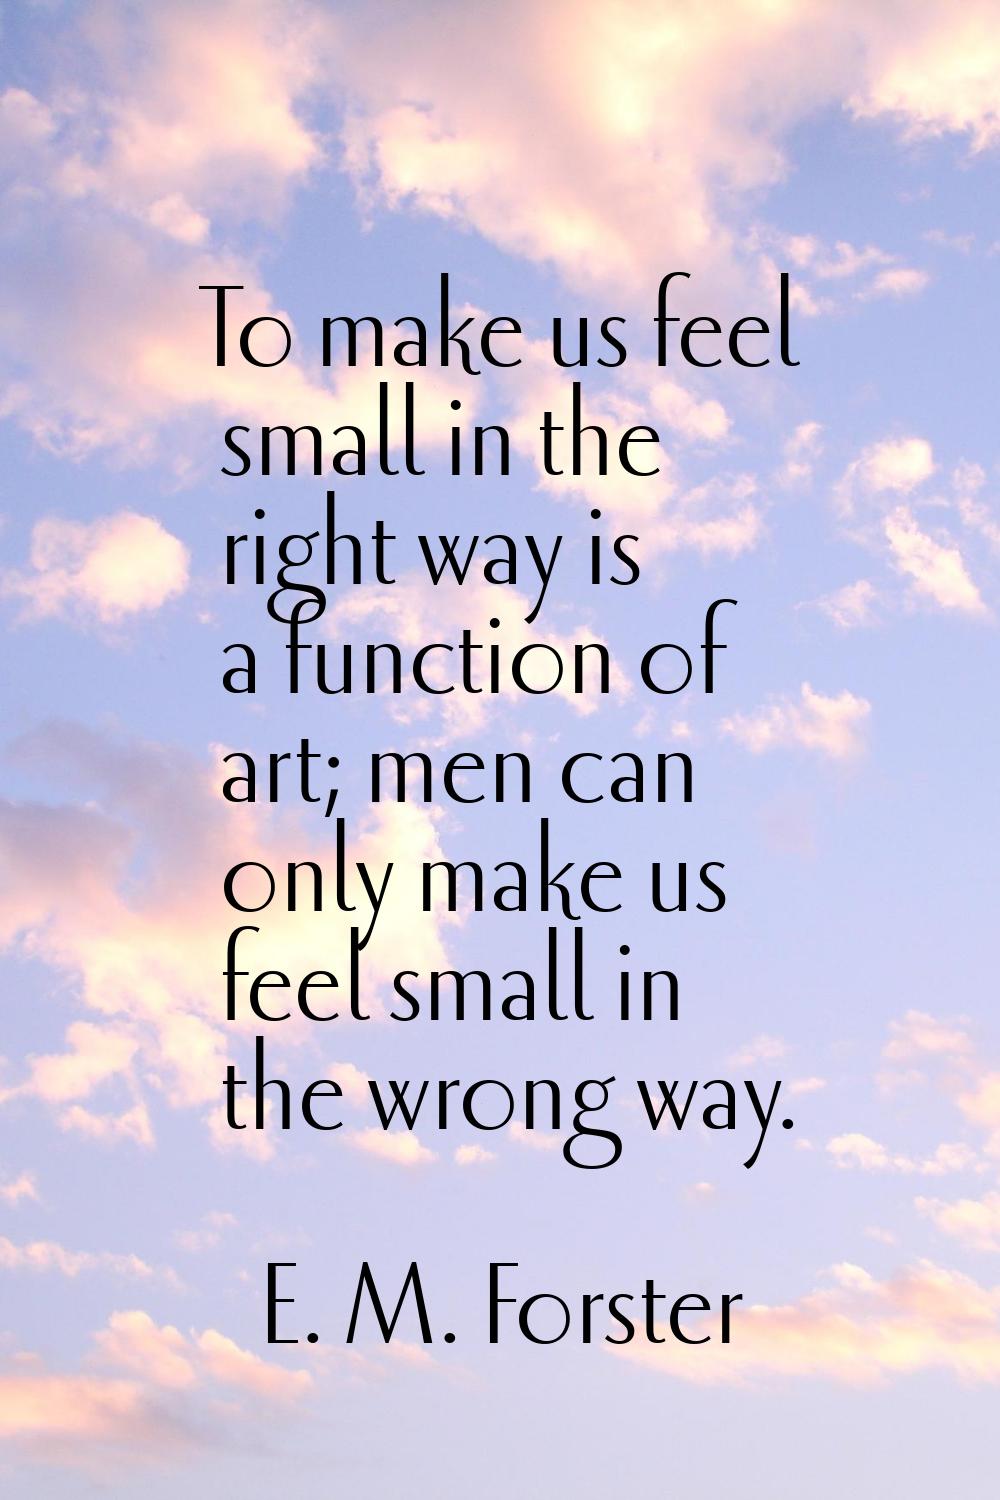 To make us feel small in the right way is a function of art; men can only make us feel small in the